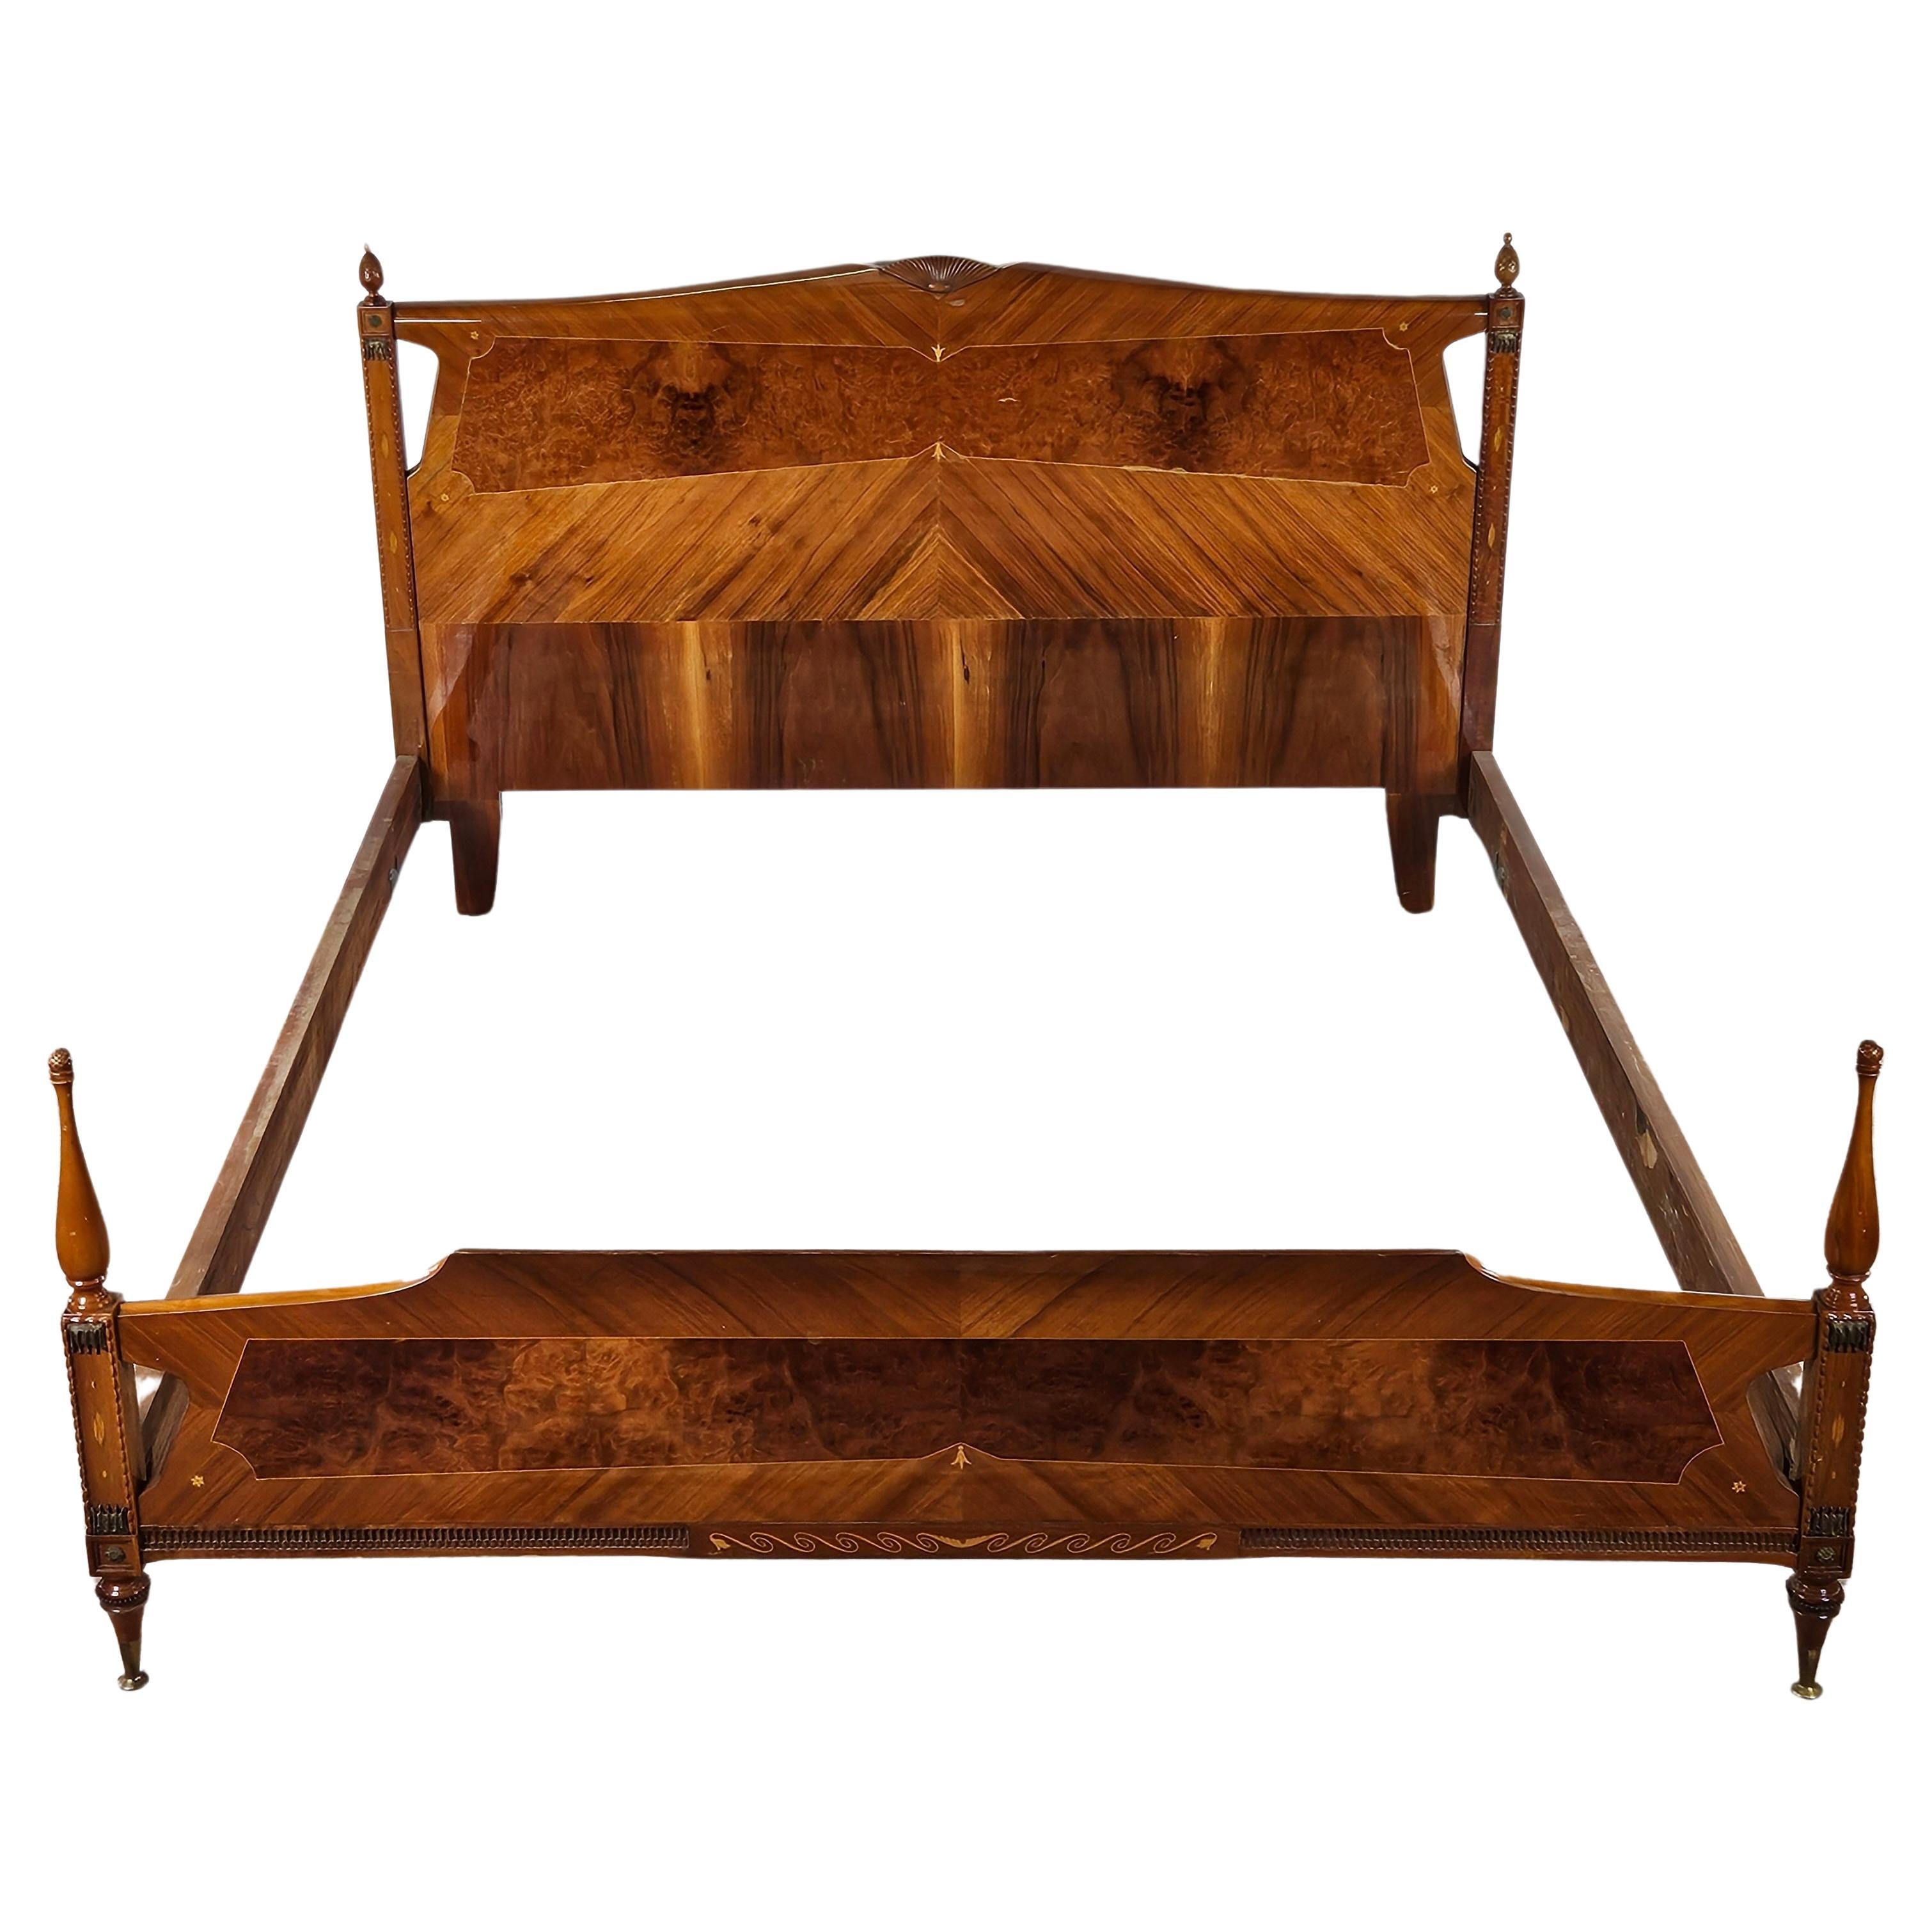 1960s double bed inlaid with briarwood and brass decorations